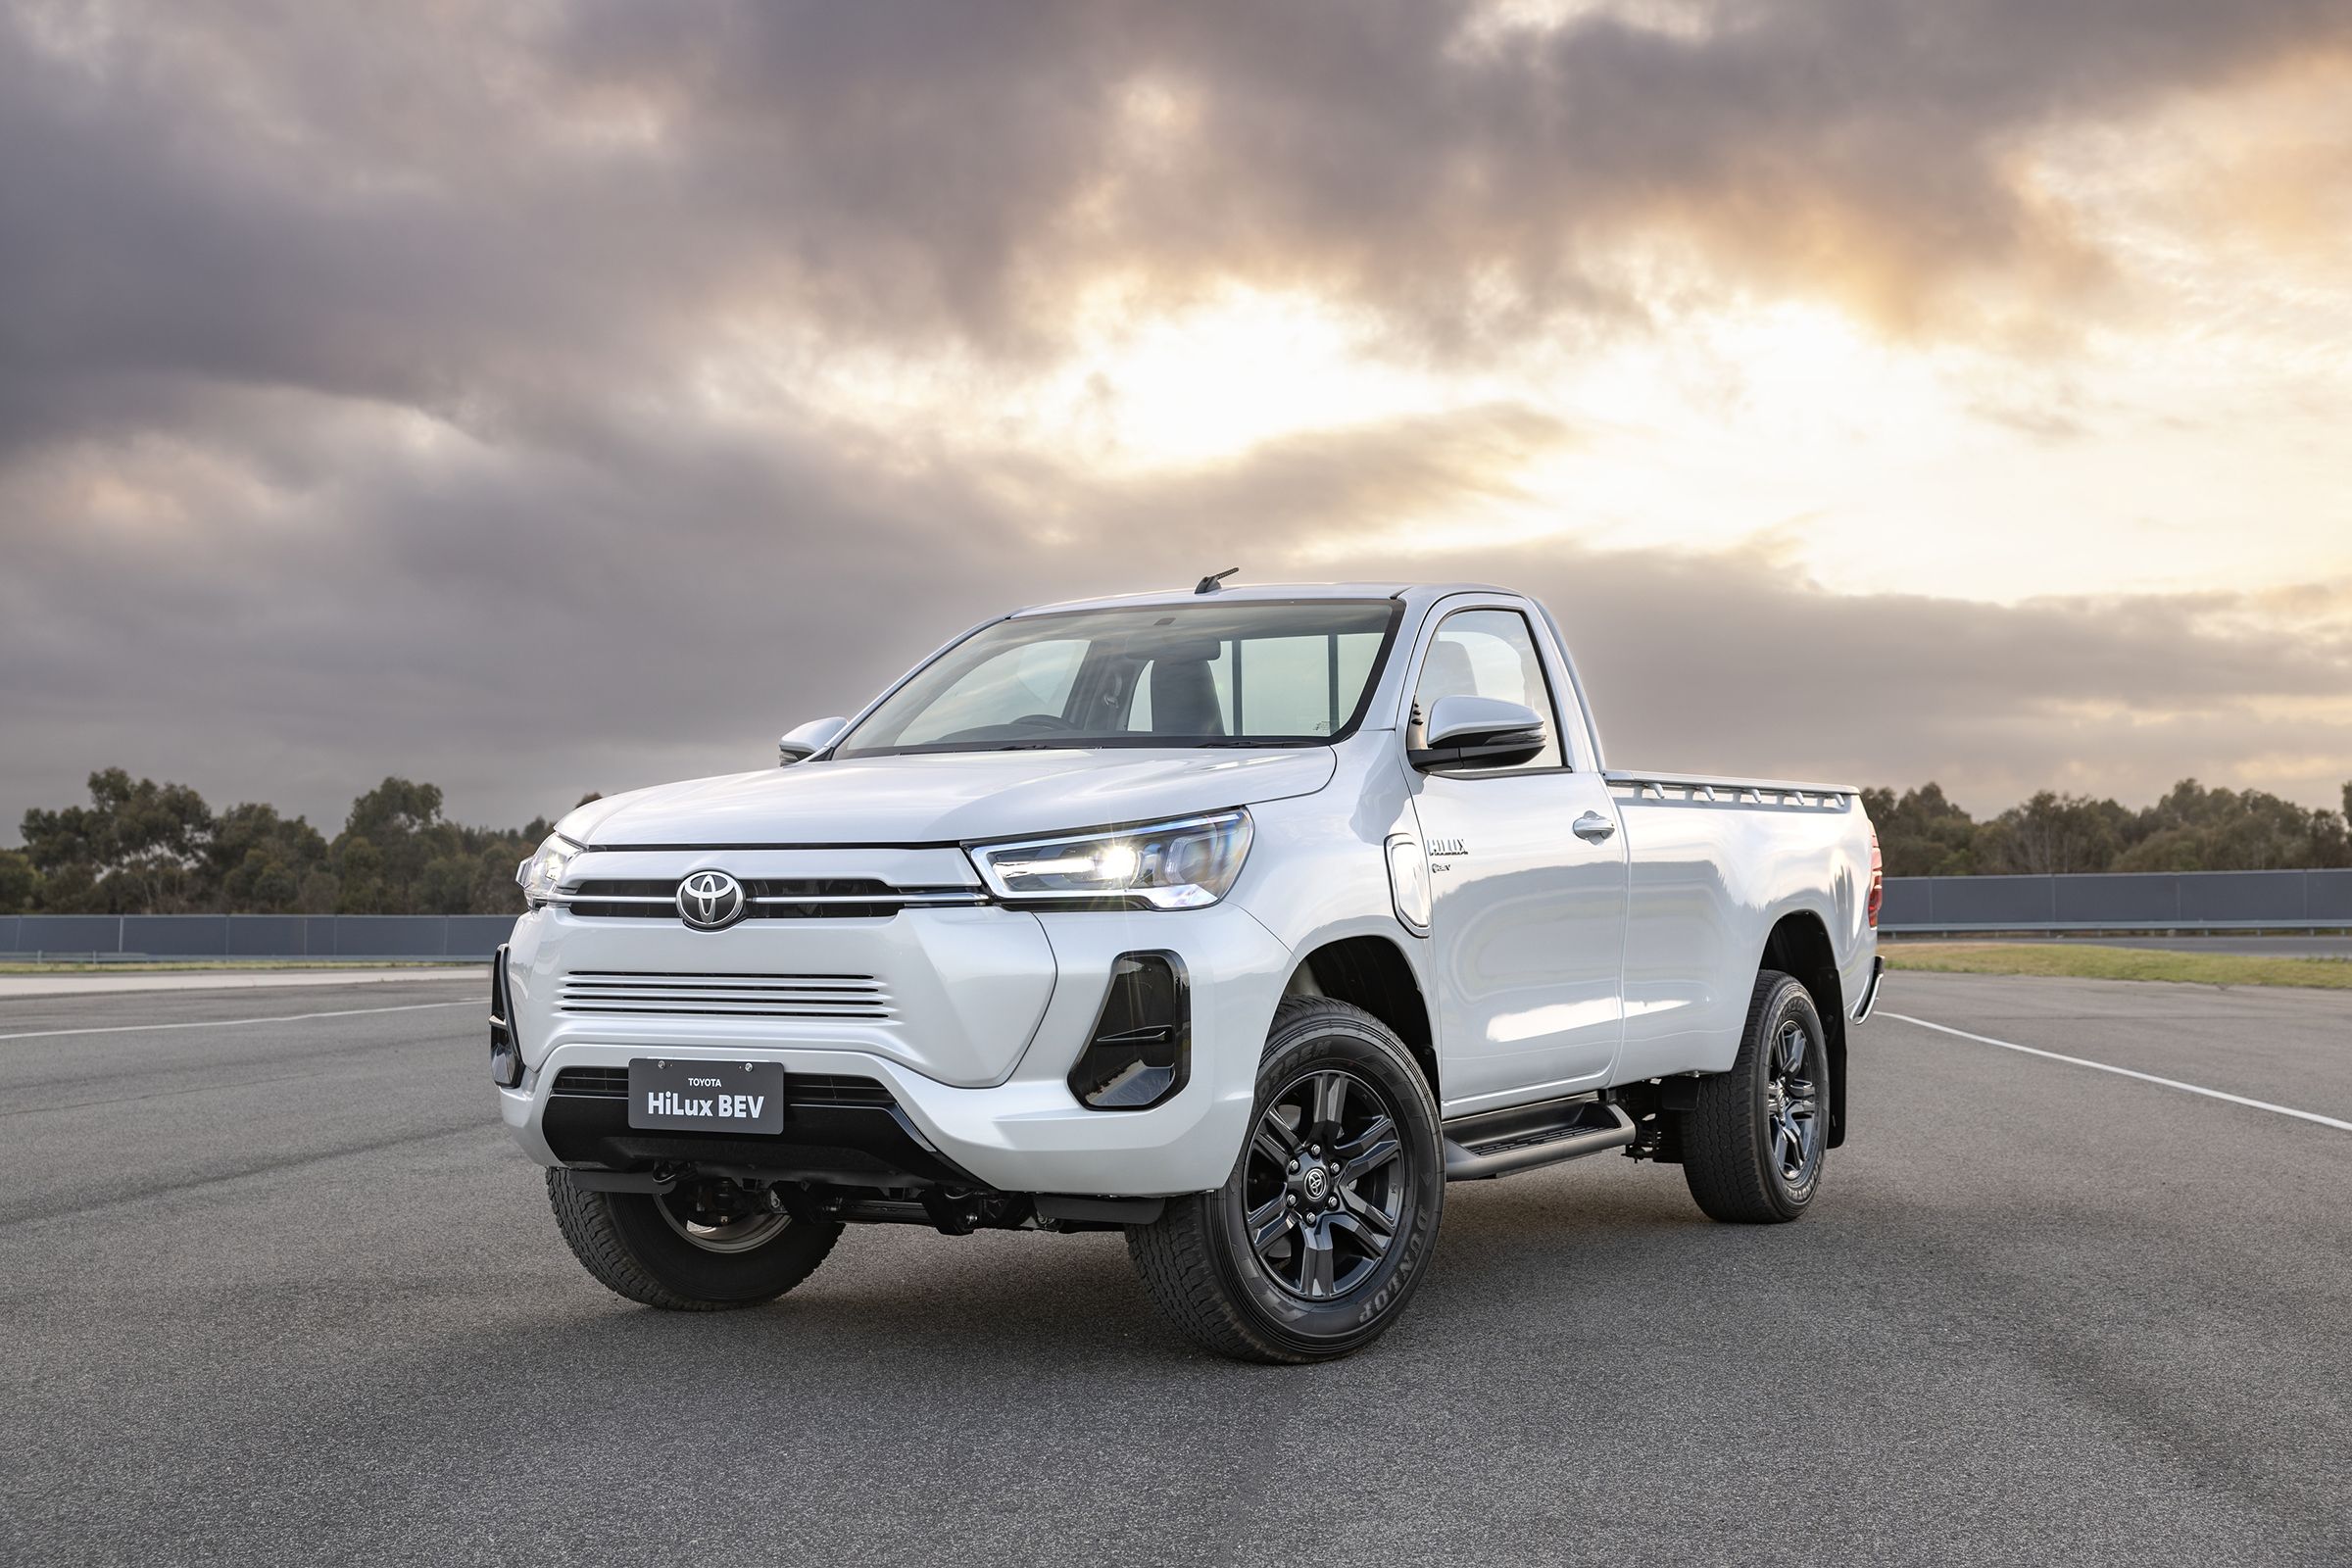 From F-150 to Hilux: Some of the world's top-selling cars by country